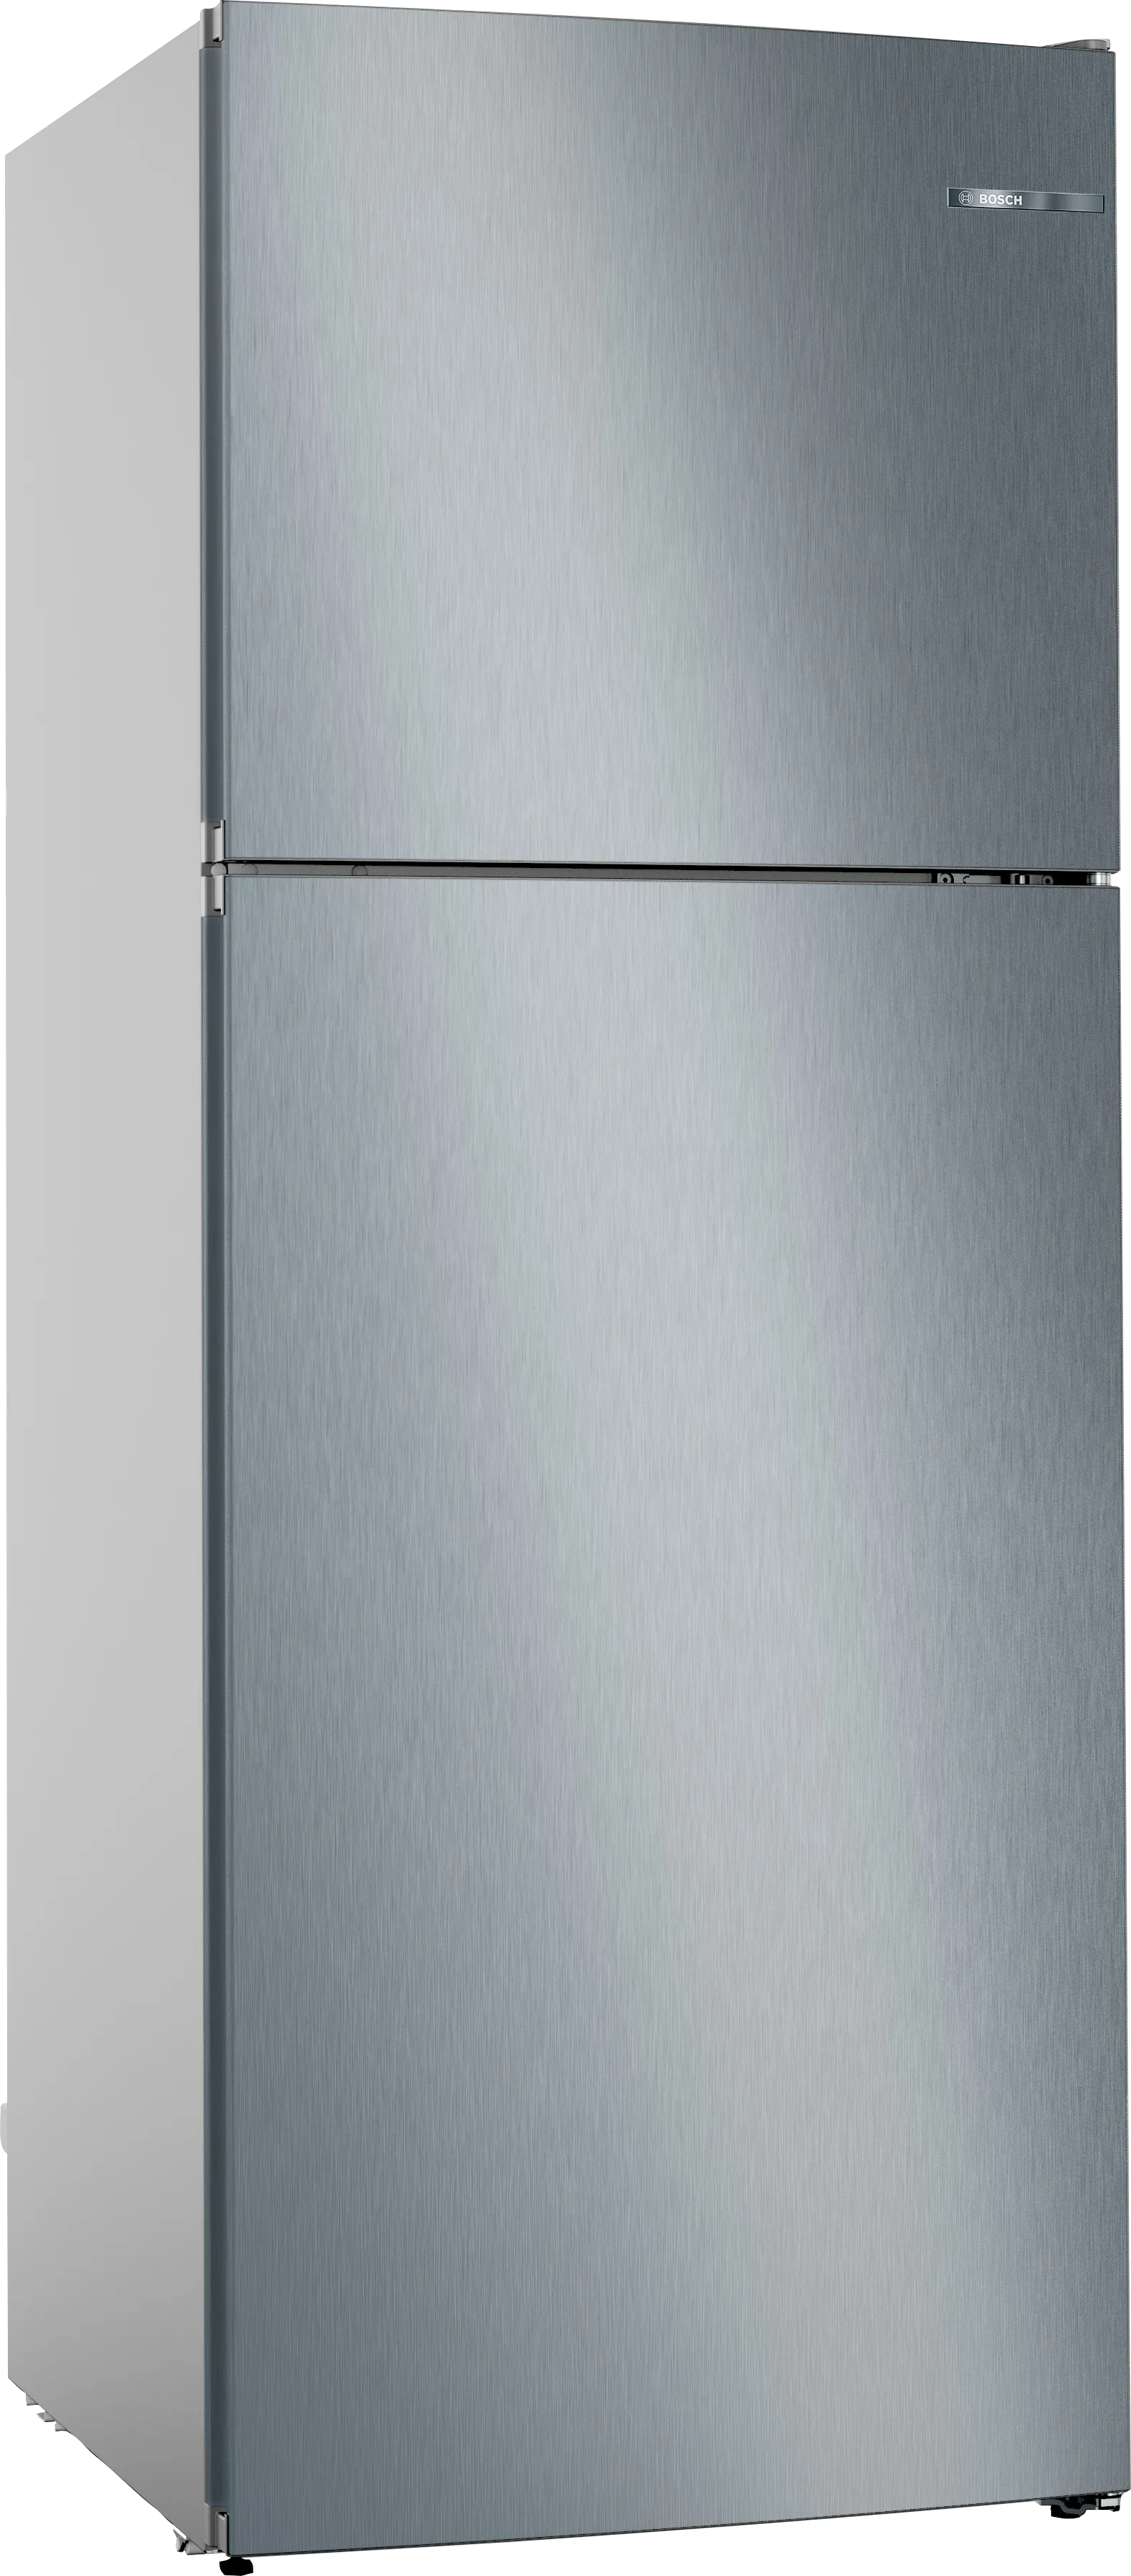 Series 4 Free-standing fridge-freezer with freezer at top 186 x 70 cm Stainless steel look 